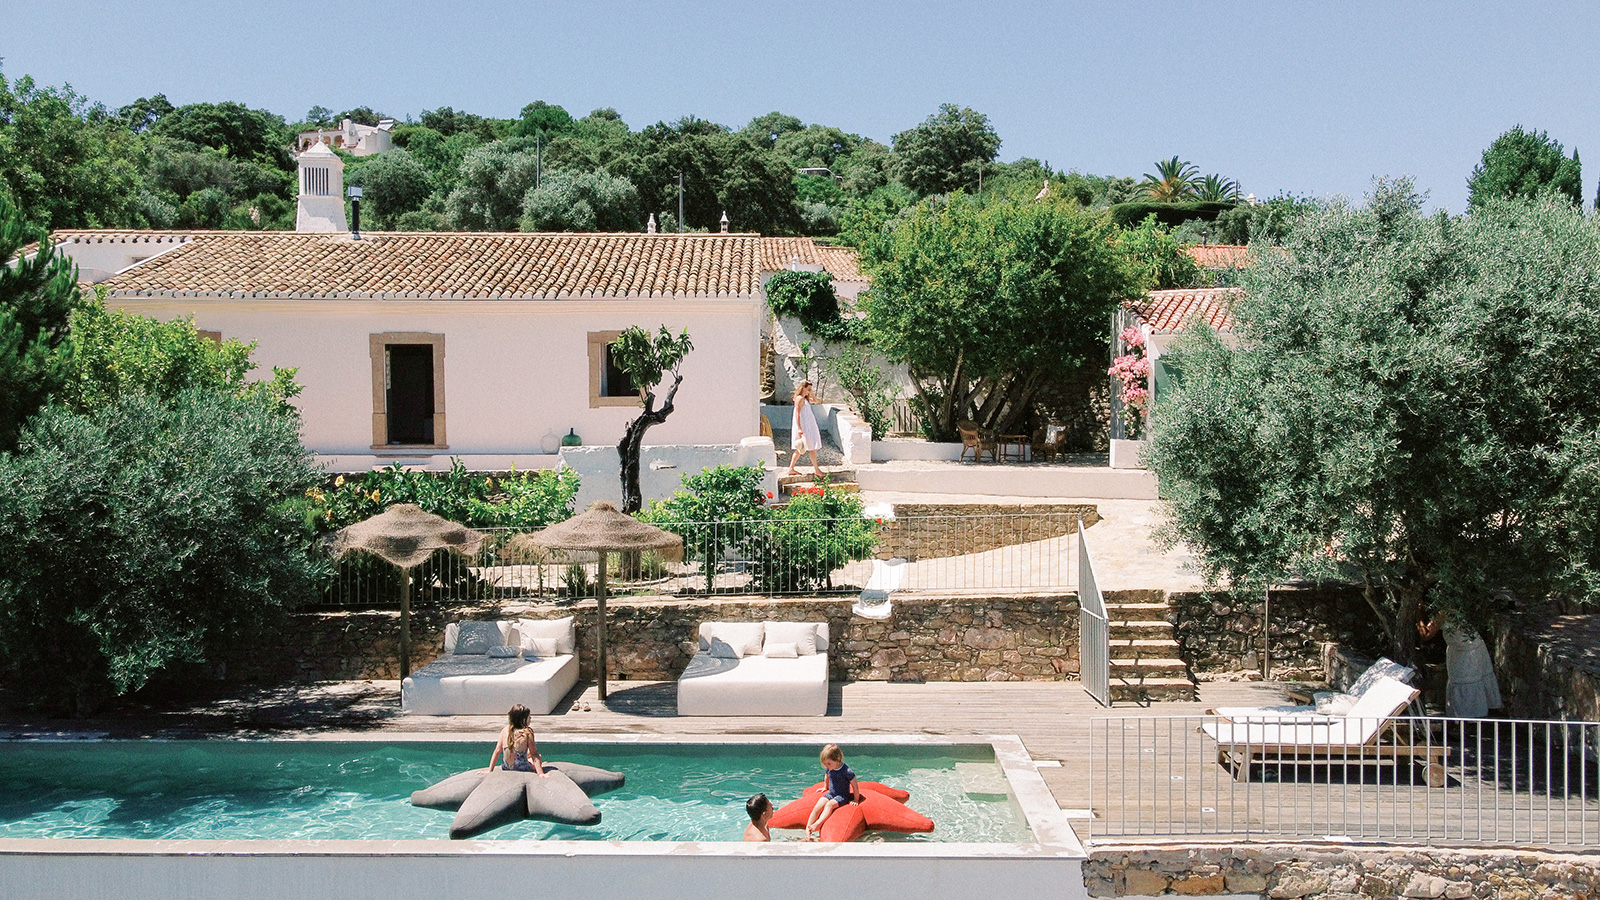 Casa 1876 boutique hotel and holiday villa in Portugal